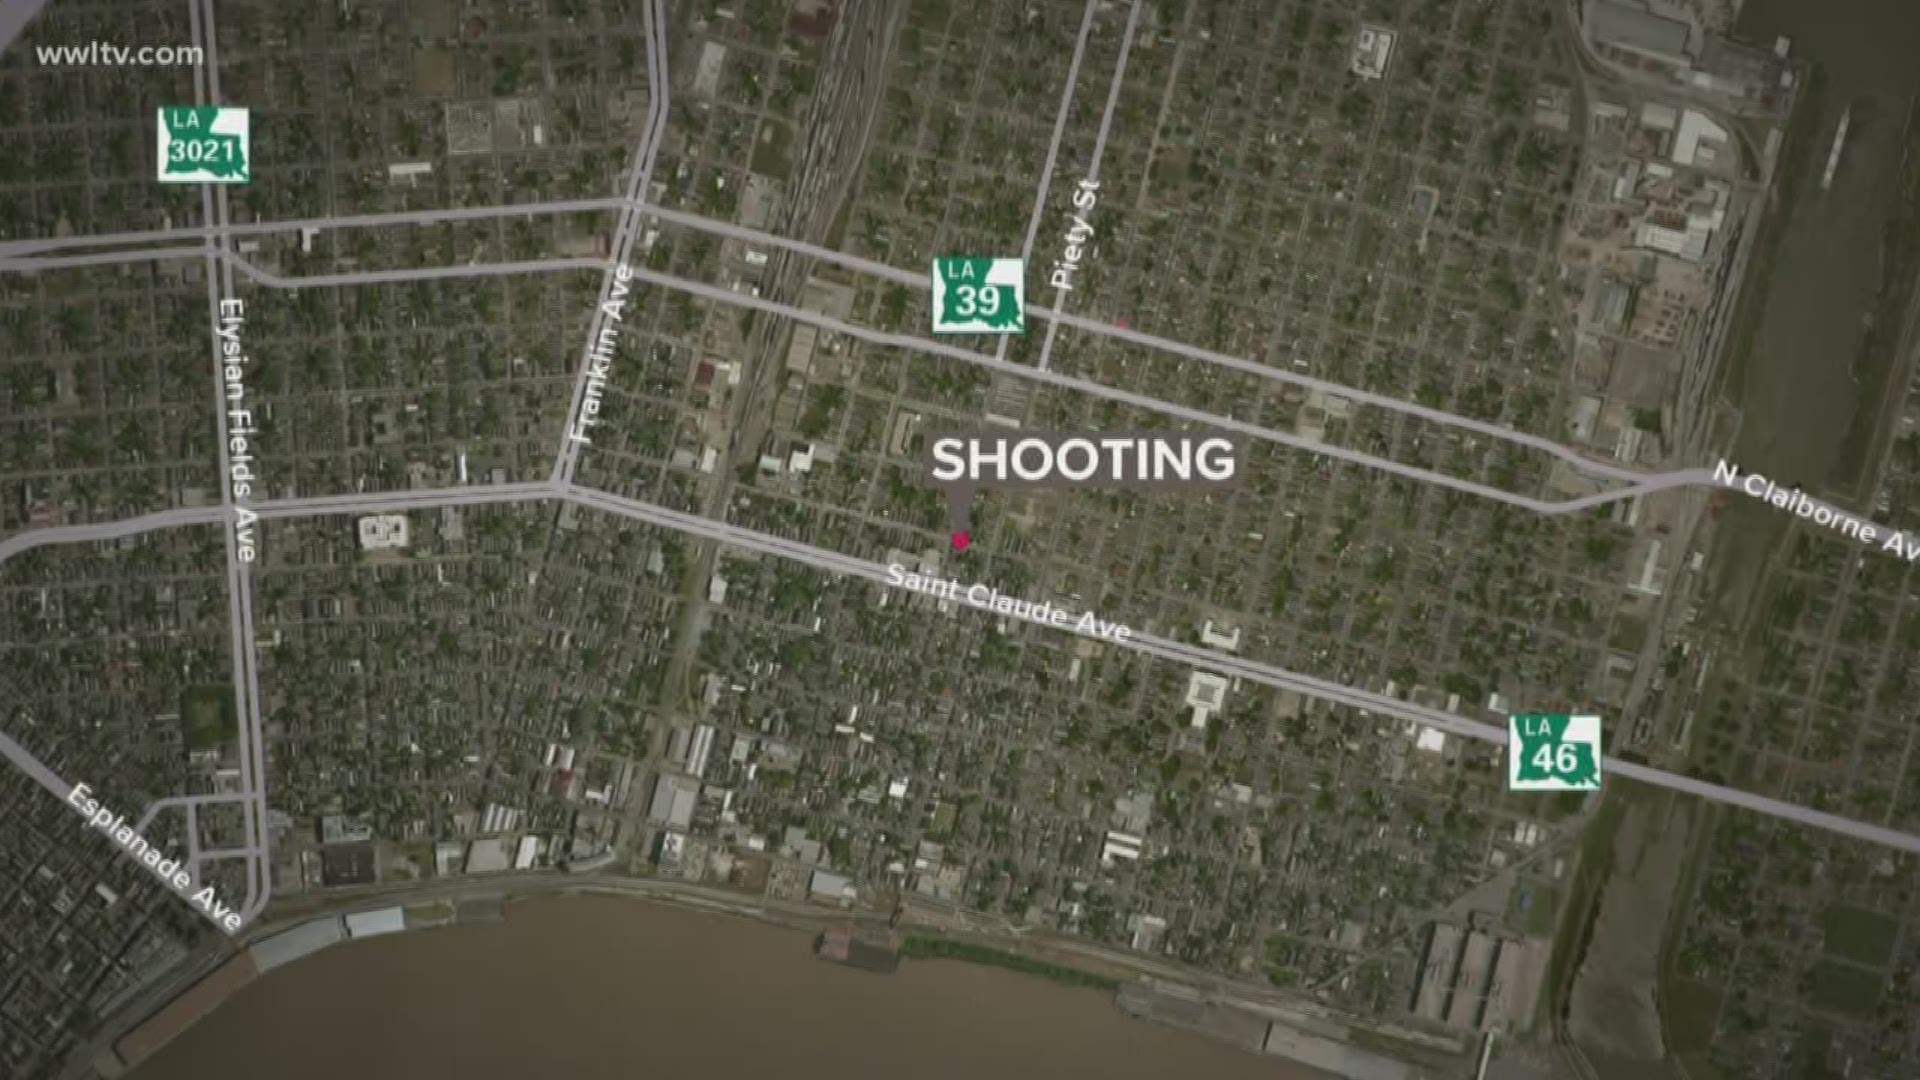 At least two suspects started shooting at each other Sunday evening, injuring three people.